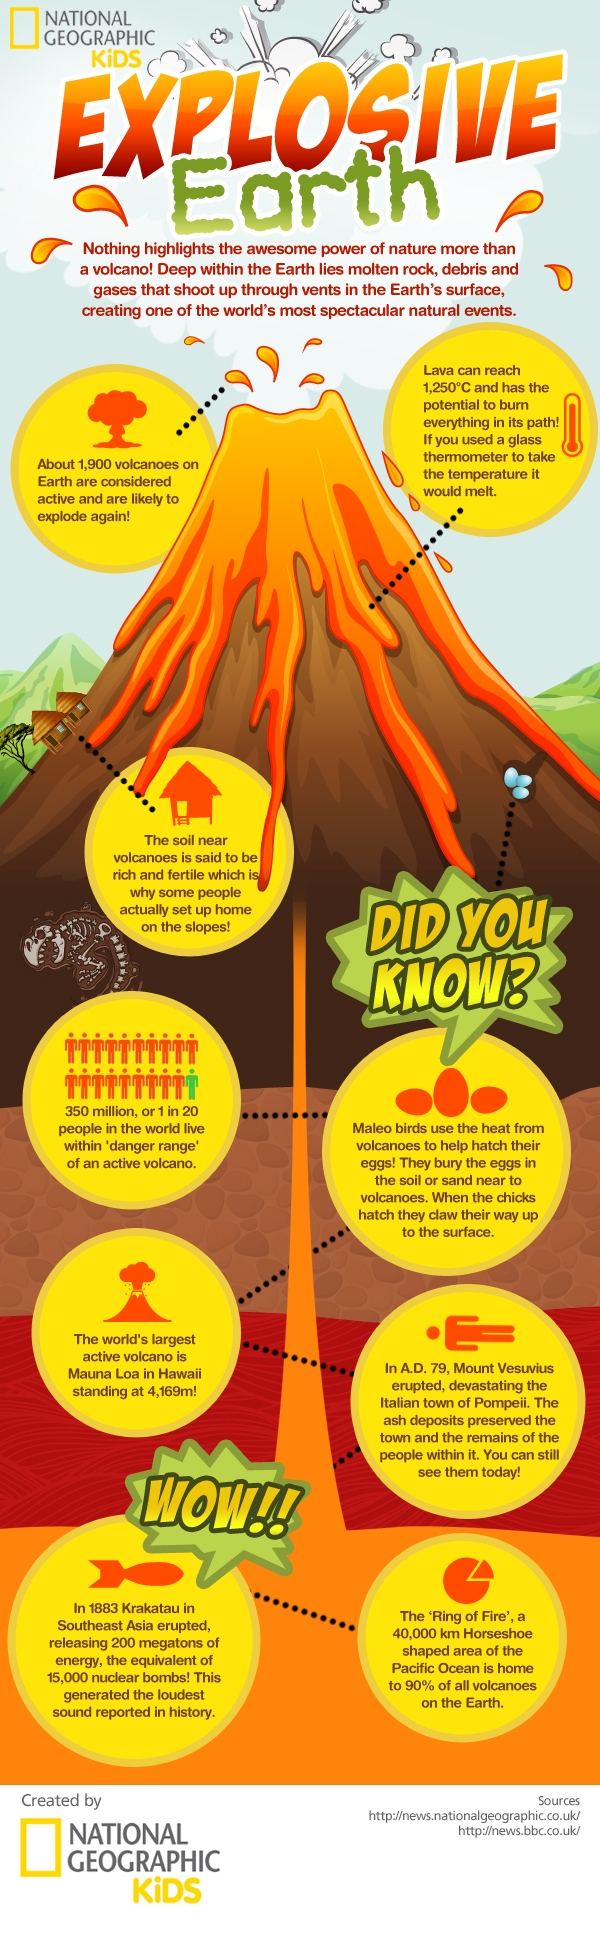 Volcano facts